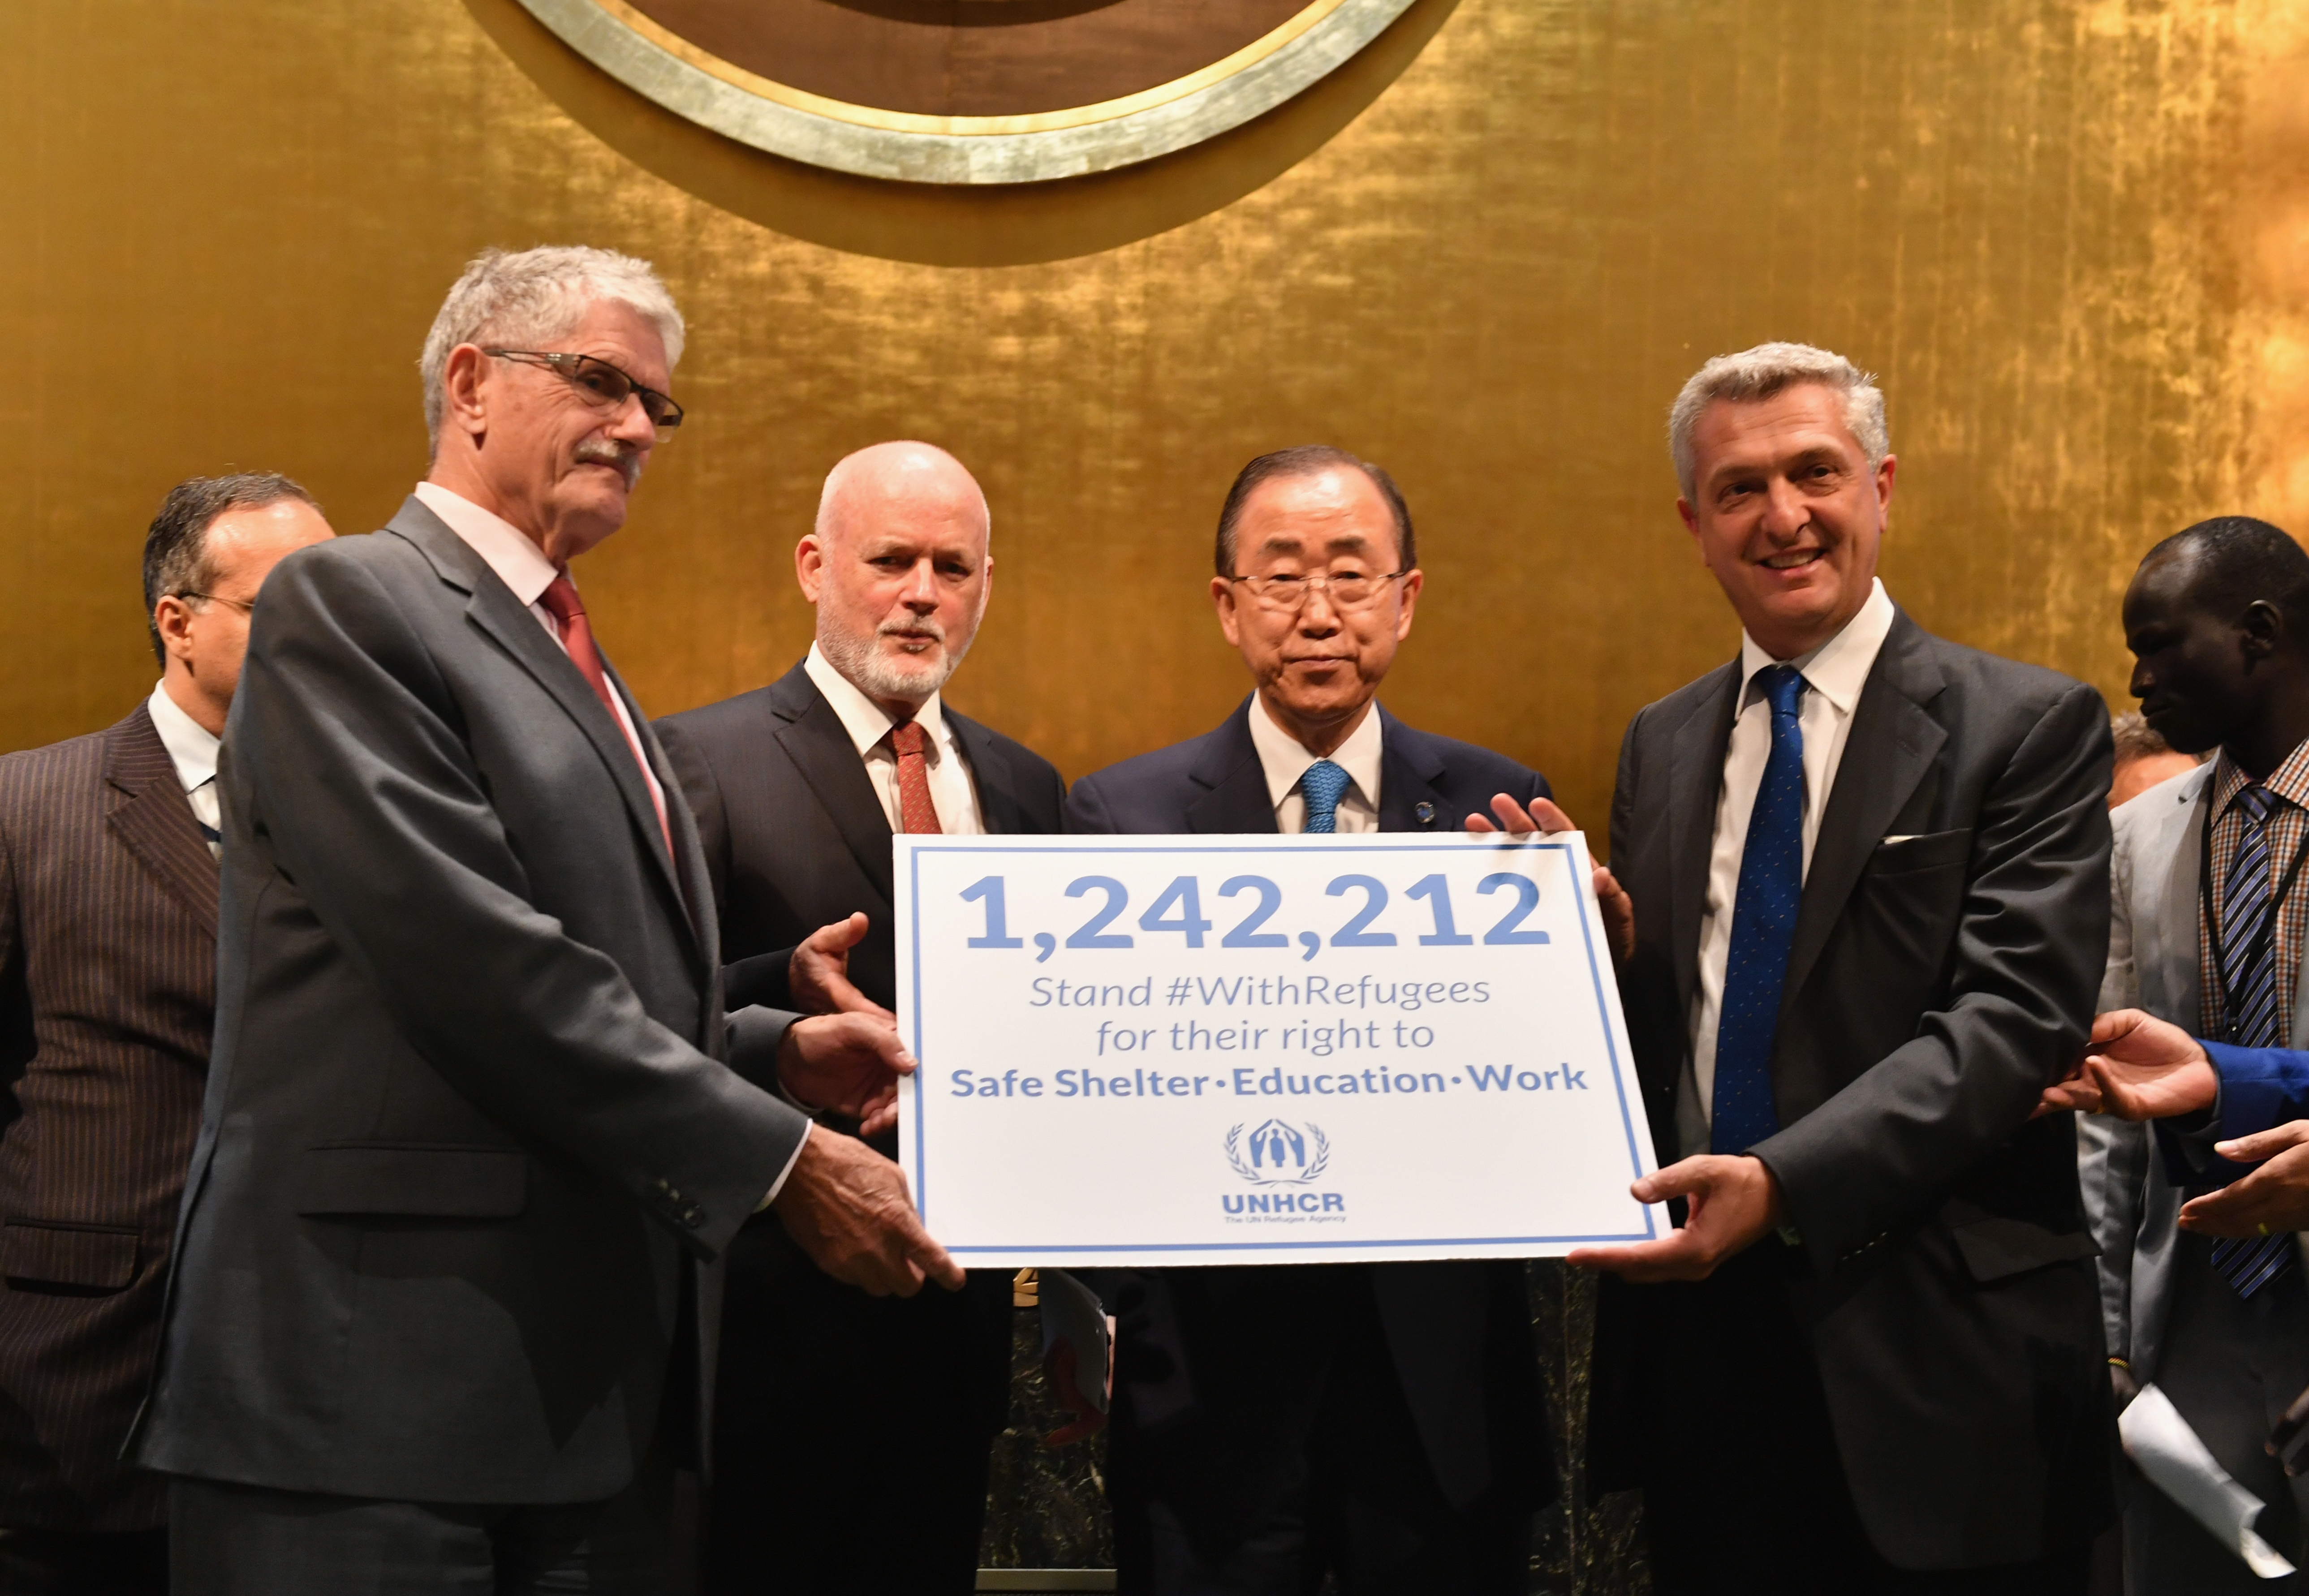 (L-R) President of the General Assembly #70 Mogens Lykketoft, President of the General Assembly #71 Peter Thomson, UN Secretary General Ban Ki Moon, and UNHCR High Commissioner Filippo Grandi attend UNHCR #WithRefugees petition handover at UN General Assembly Hall at United Nations on September 16, 2016 in New York City. ; UN Secretary-General Ban Ki-moon today received a petition – #WithRefugees – from UNHCR, the UN Refugee Agency, signed by more than 1.2 million people expressing solidarity with millions of people across the world driven from their homes by conflict and persecution.
Taking receipt of the appeal at the UN General Assembly in New York, together with Assembly President Peter Thomson, Ban noted the global scope of support for refugees.
The petition calls on representatives of the 193 governments attending the Summit to make sure all refugee children can go to school; that all refugees have a safe place to live and that all refugees can work and contribute to their local community.